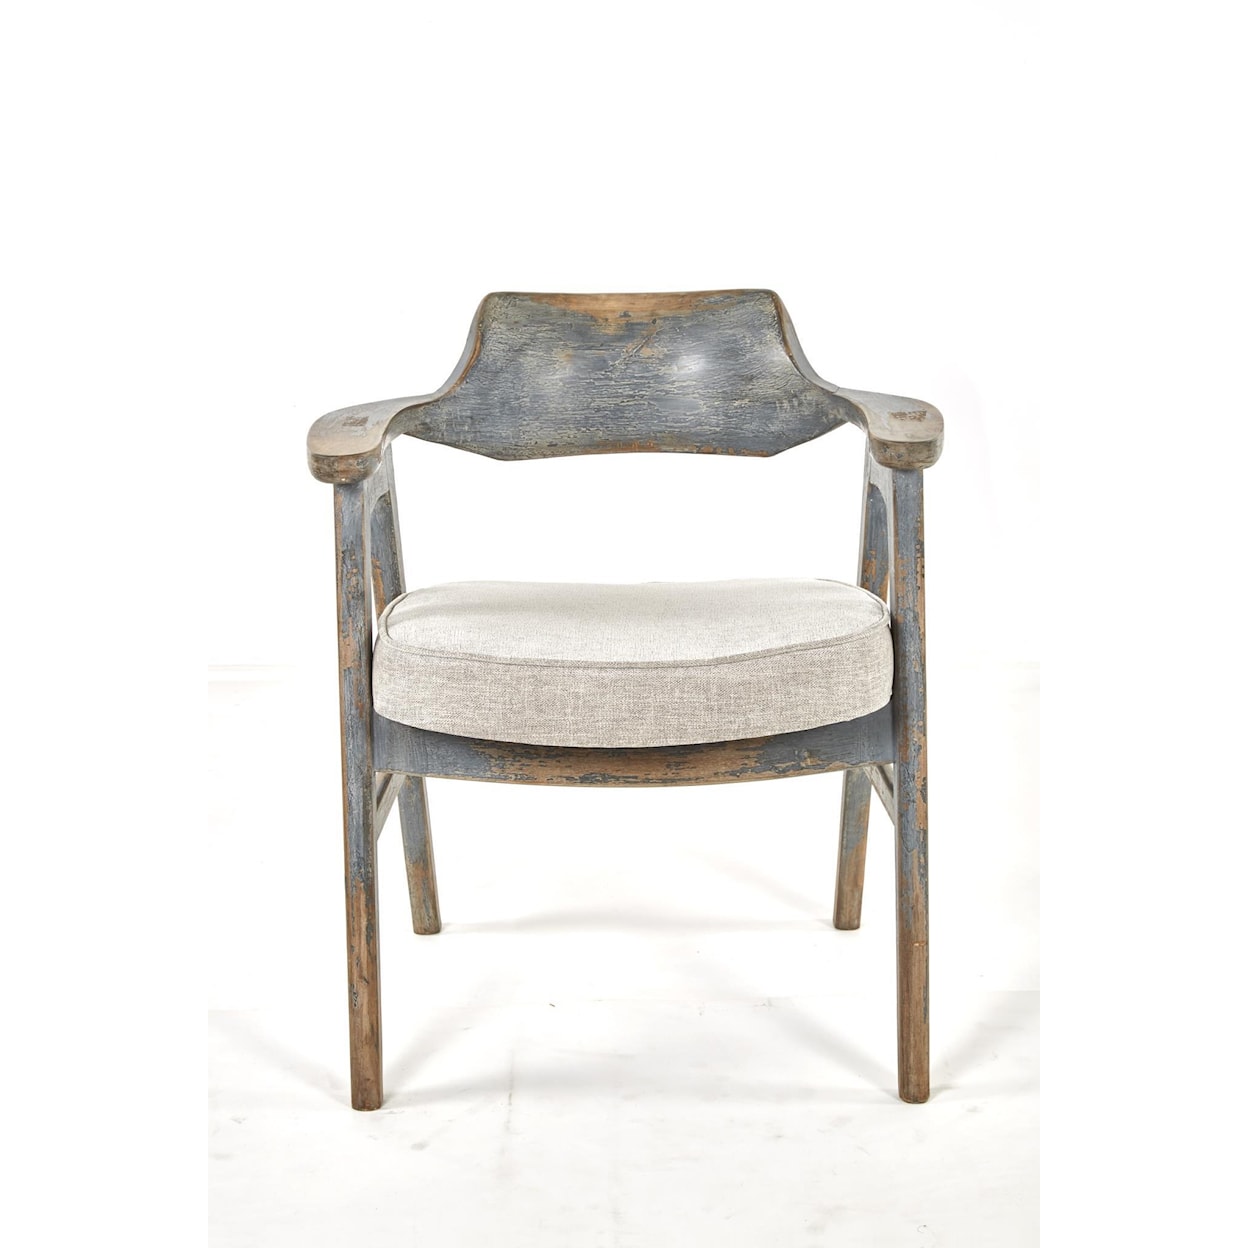 EAGLE INDUSTRIES Wagner Wagner Arm Chair Distressed Blue / Anew Grey